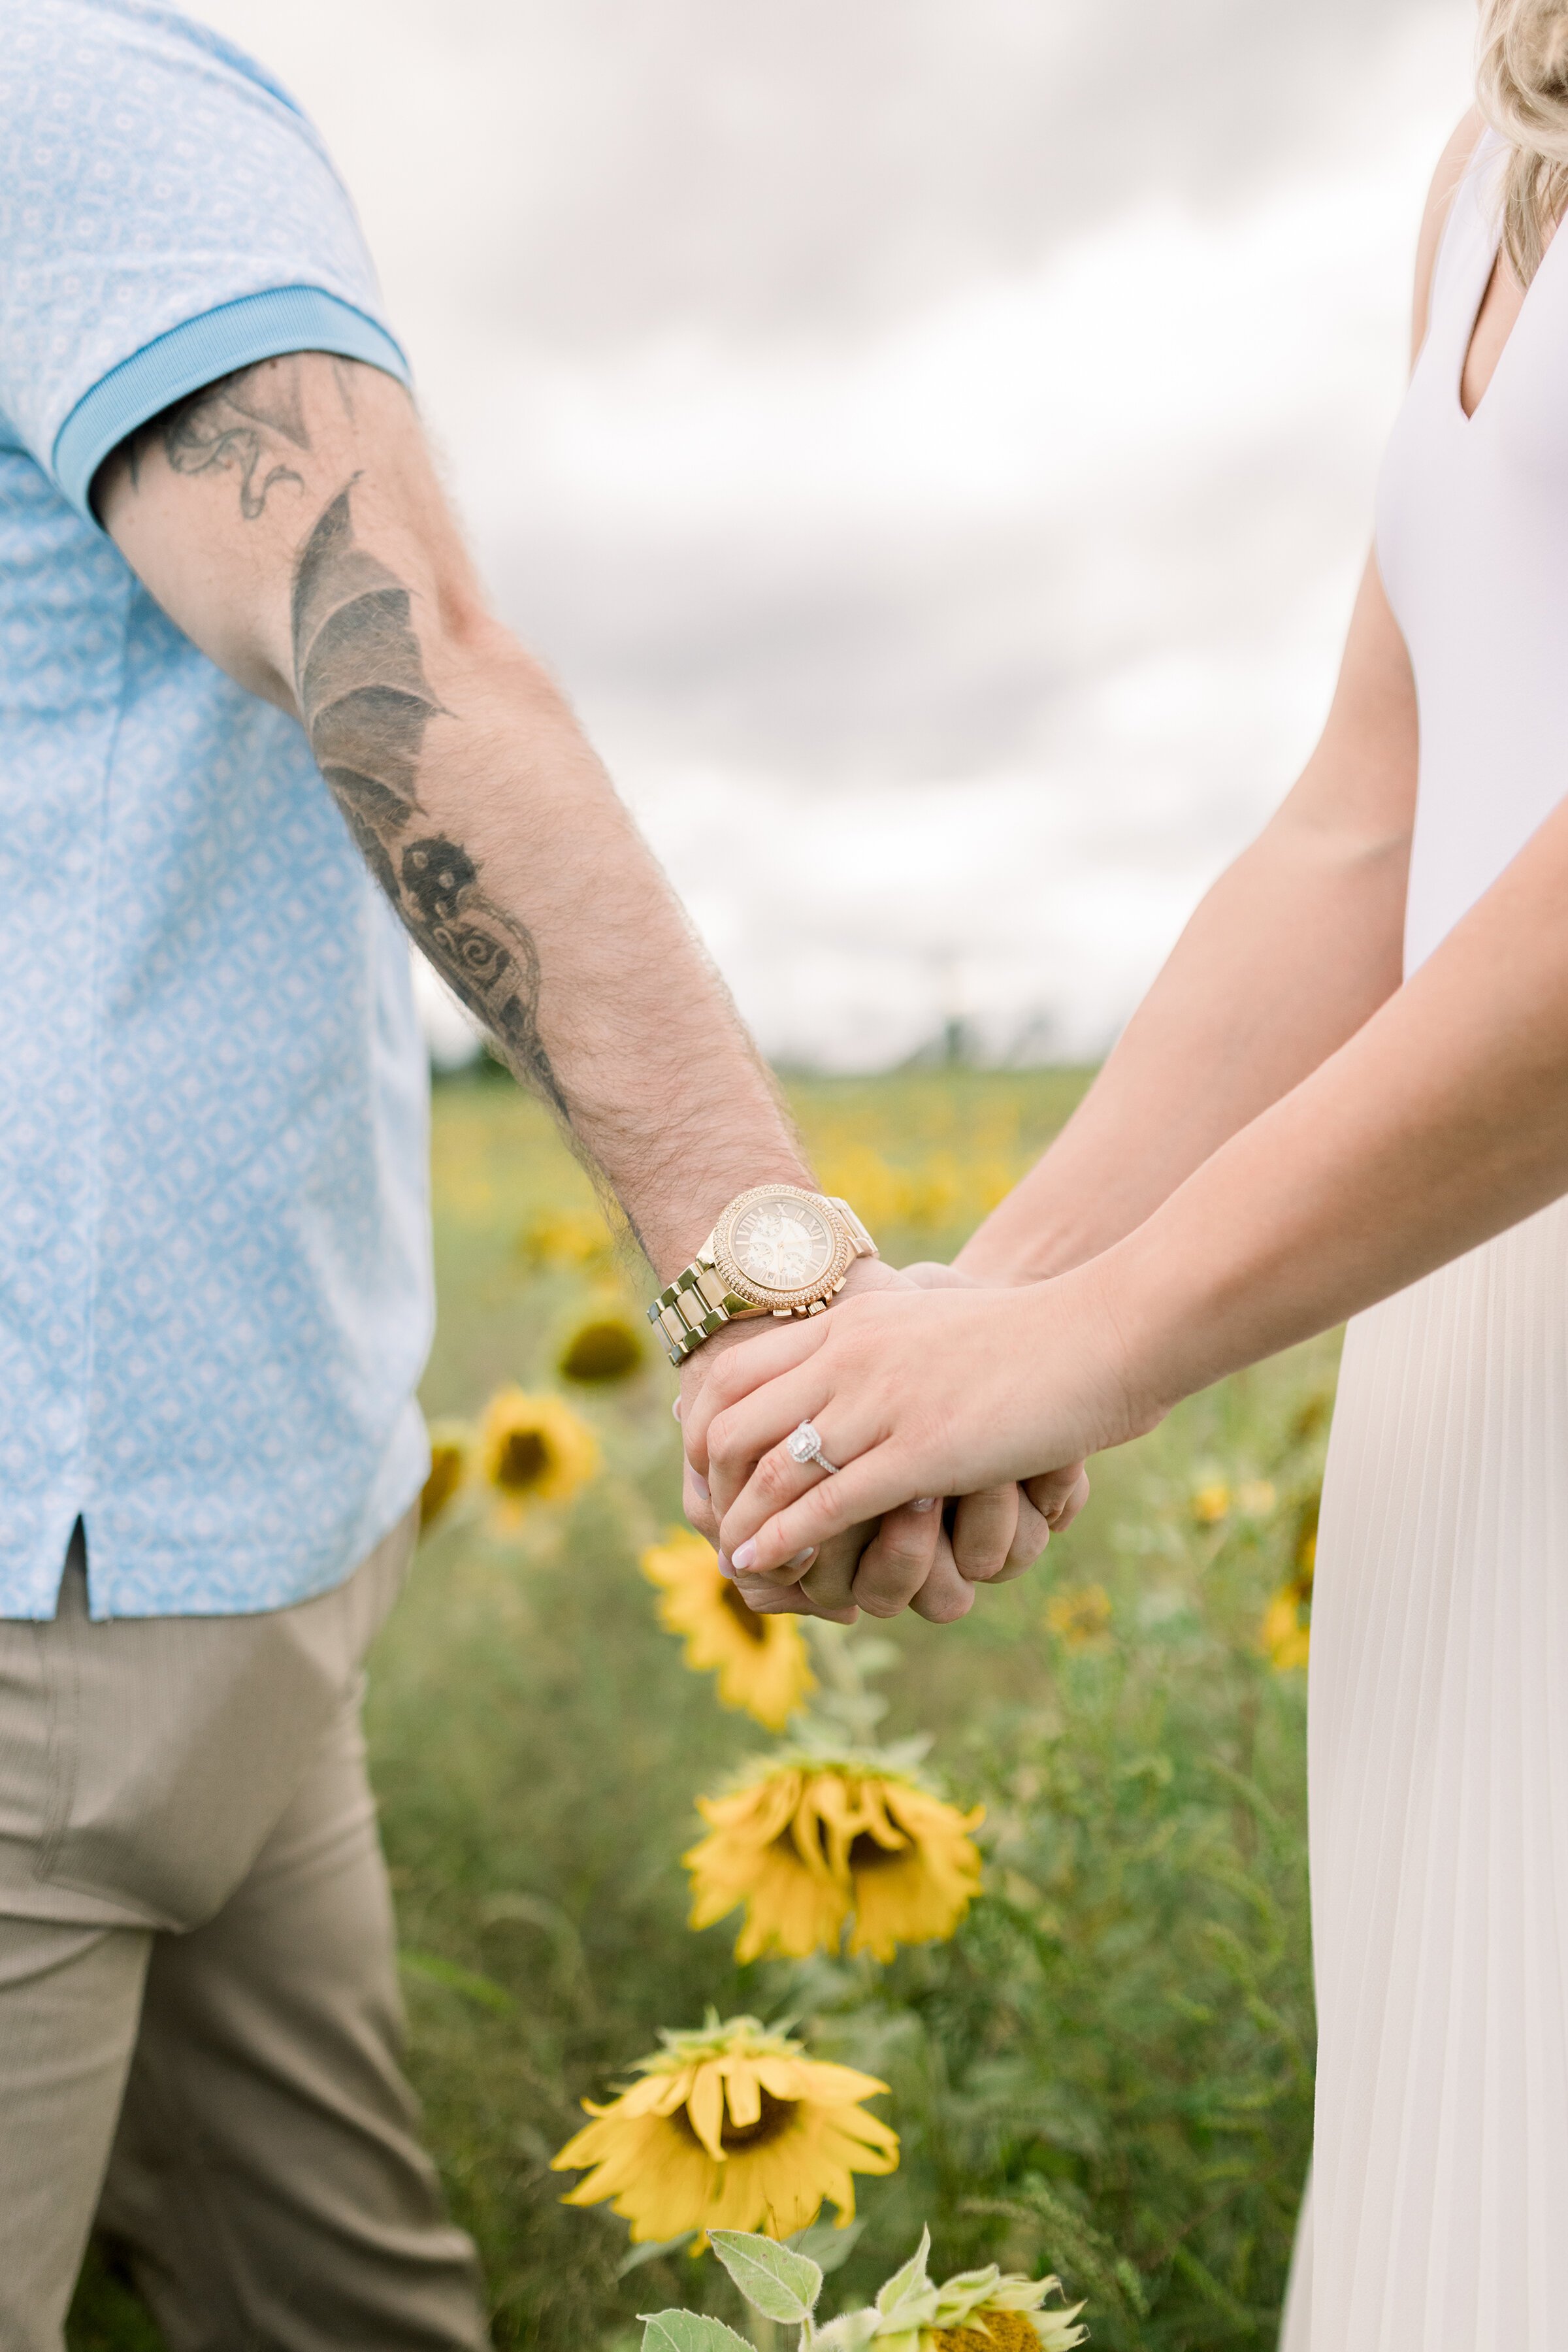  A soon to be bride holds her fiancés hand as she shows off her stunning wedding ring in Ottawa, Ontario. Chelsea Mason Photography couple goals couple pose inspiration client attire inspiration ideas and goals for men and women  outdoor goals sunflo